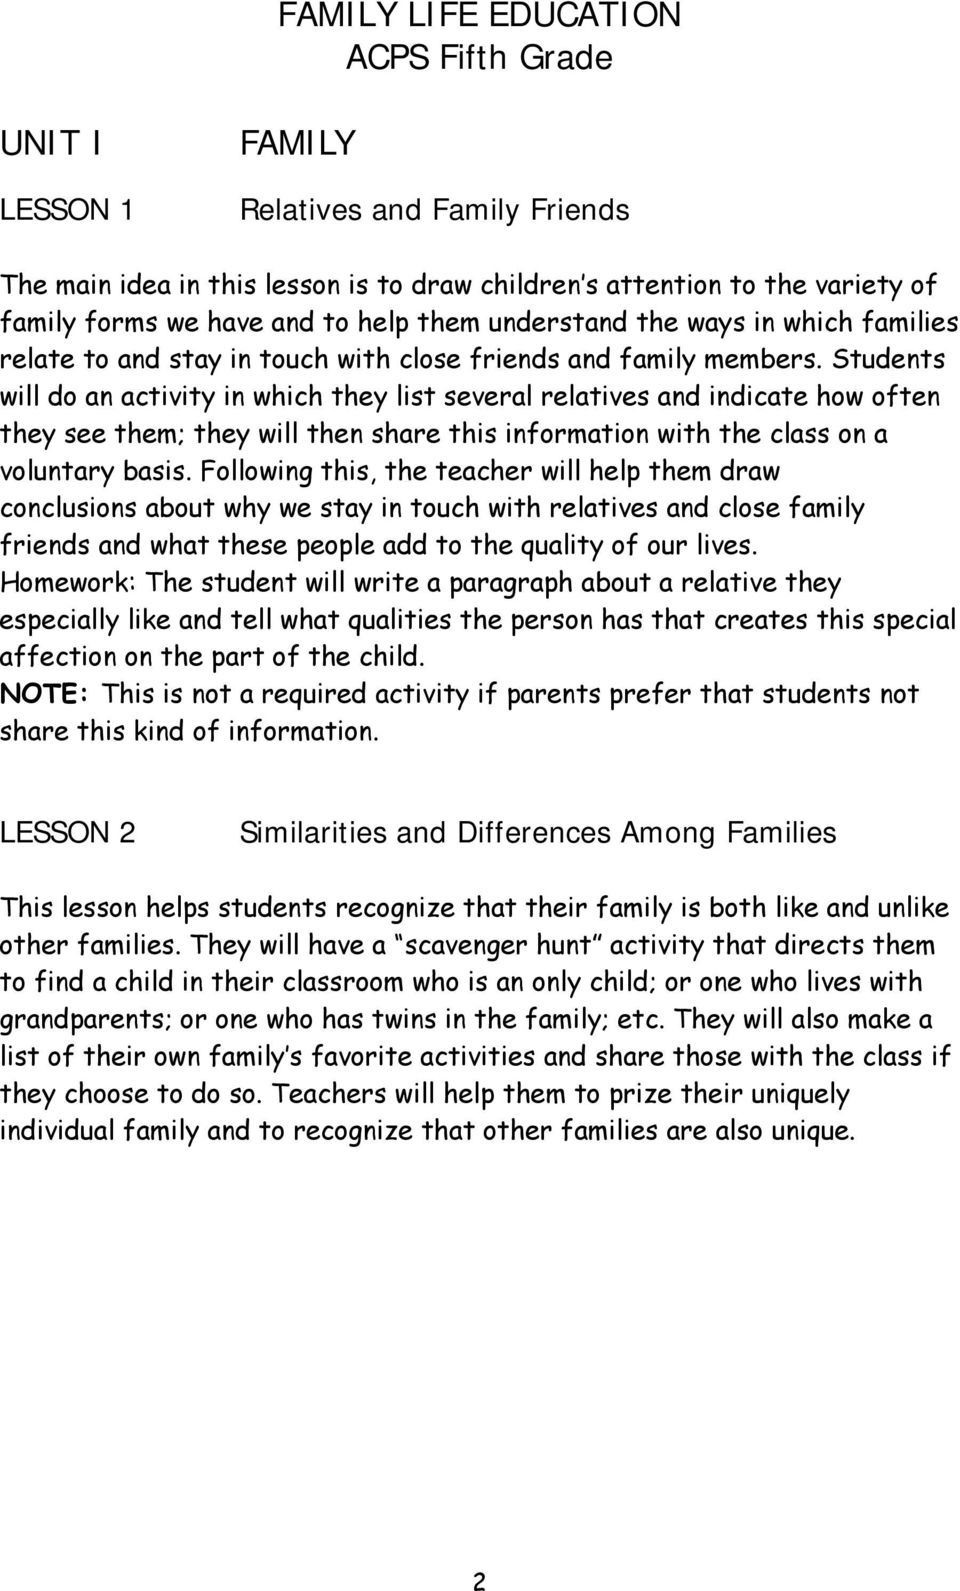 Students will do an activity in which they list several relatives and indicate how often they see them; they will then share this information with the class on a voluntary basis.